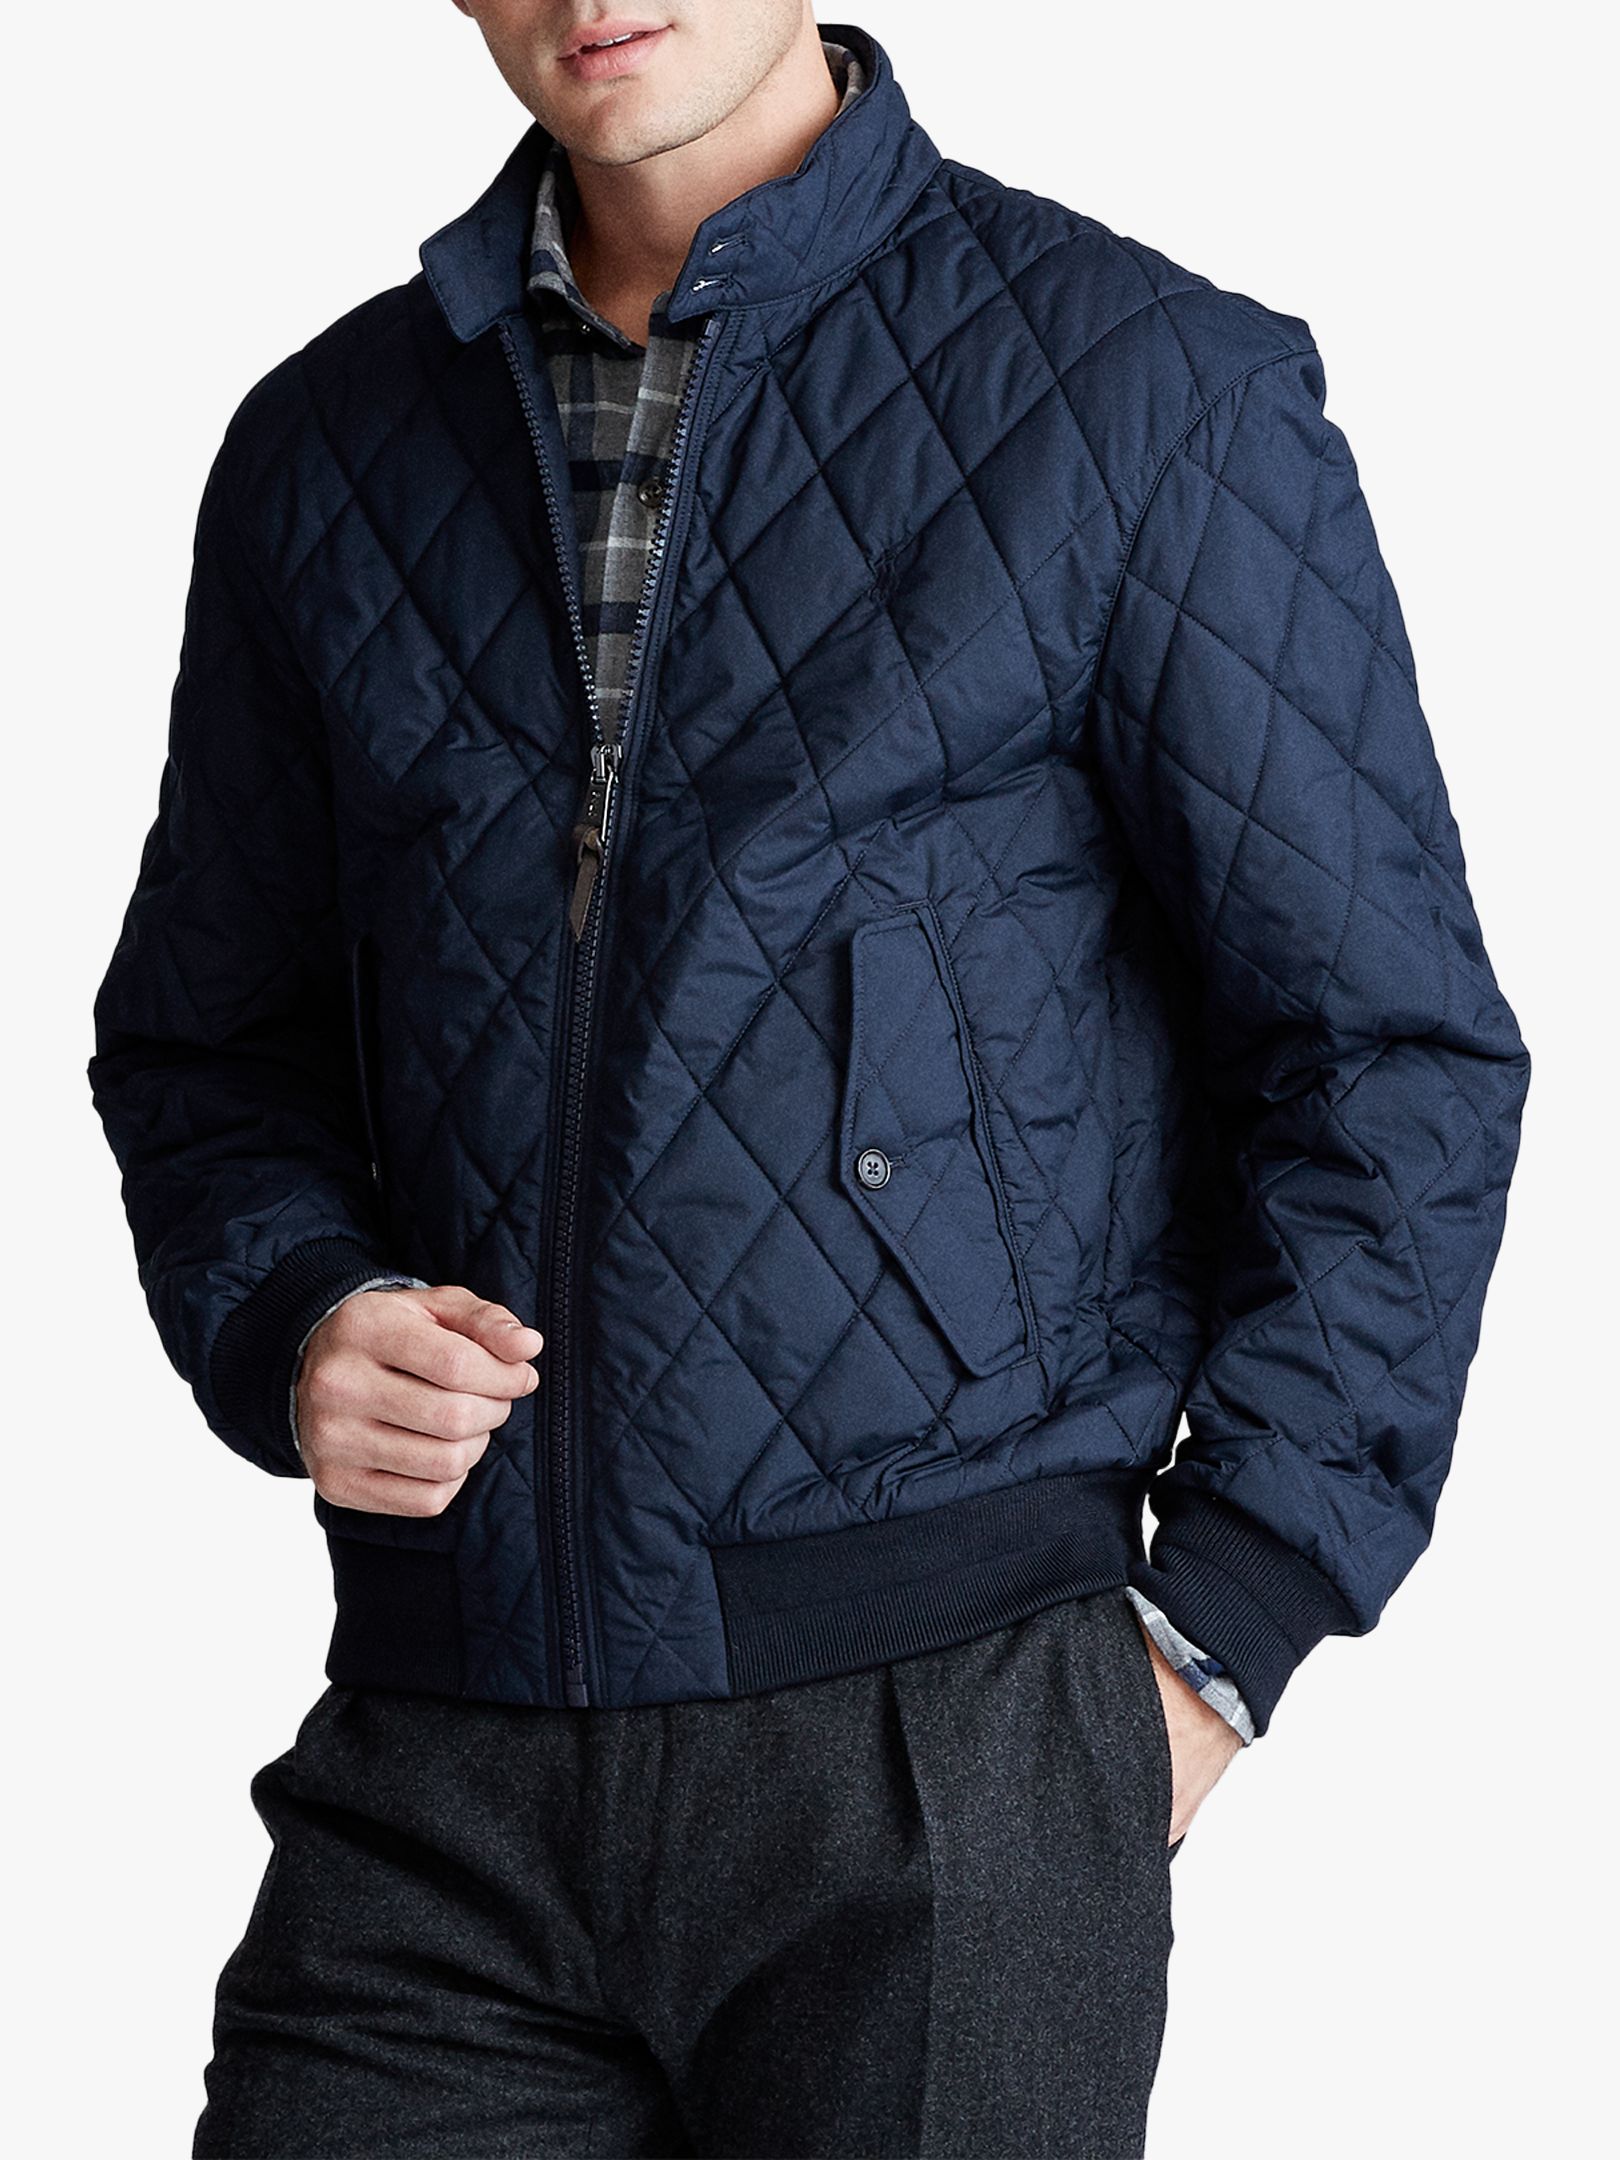 polo ralph lauren quilted jacket mens